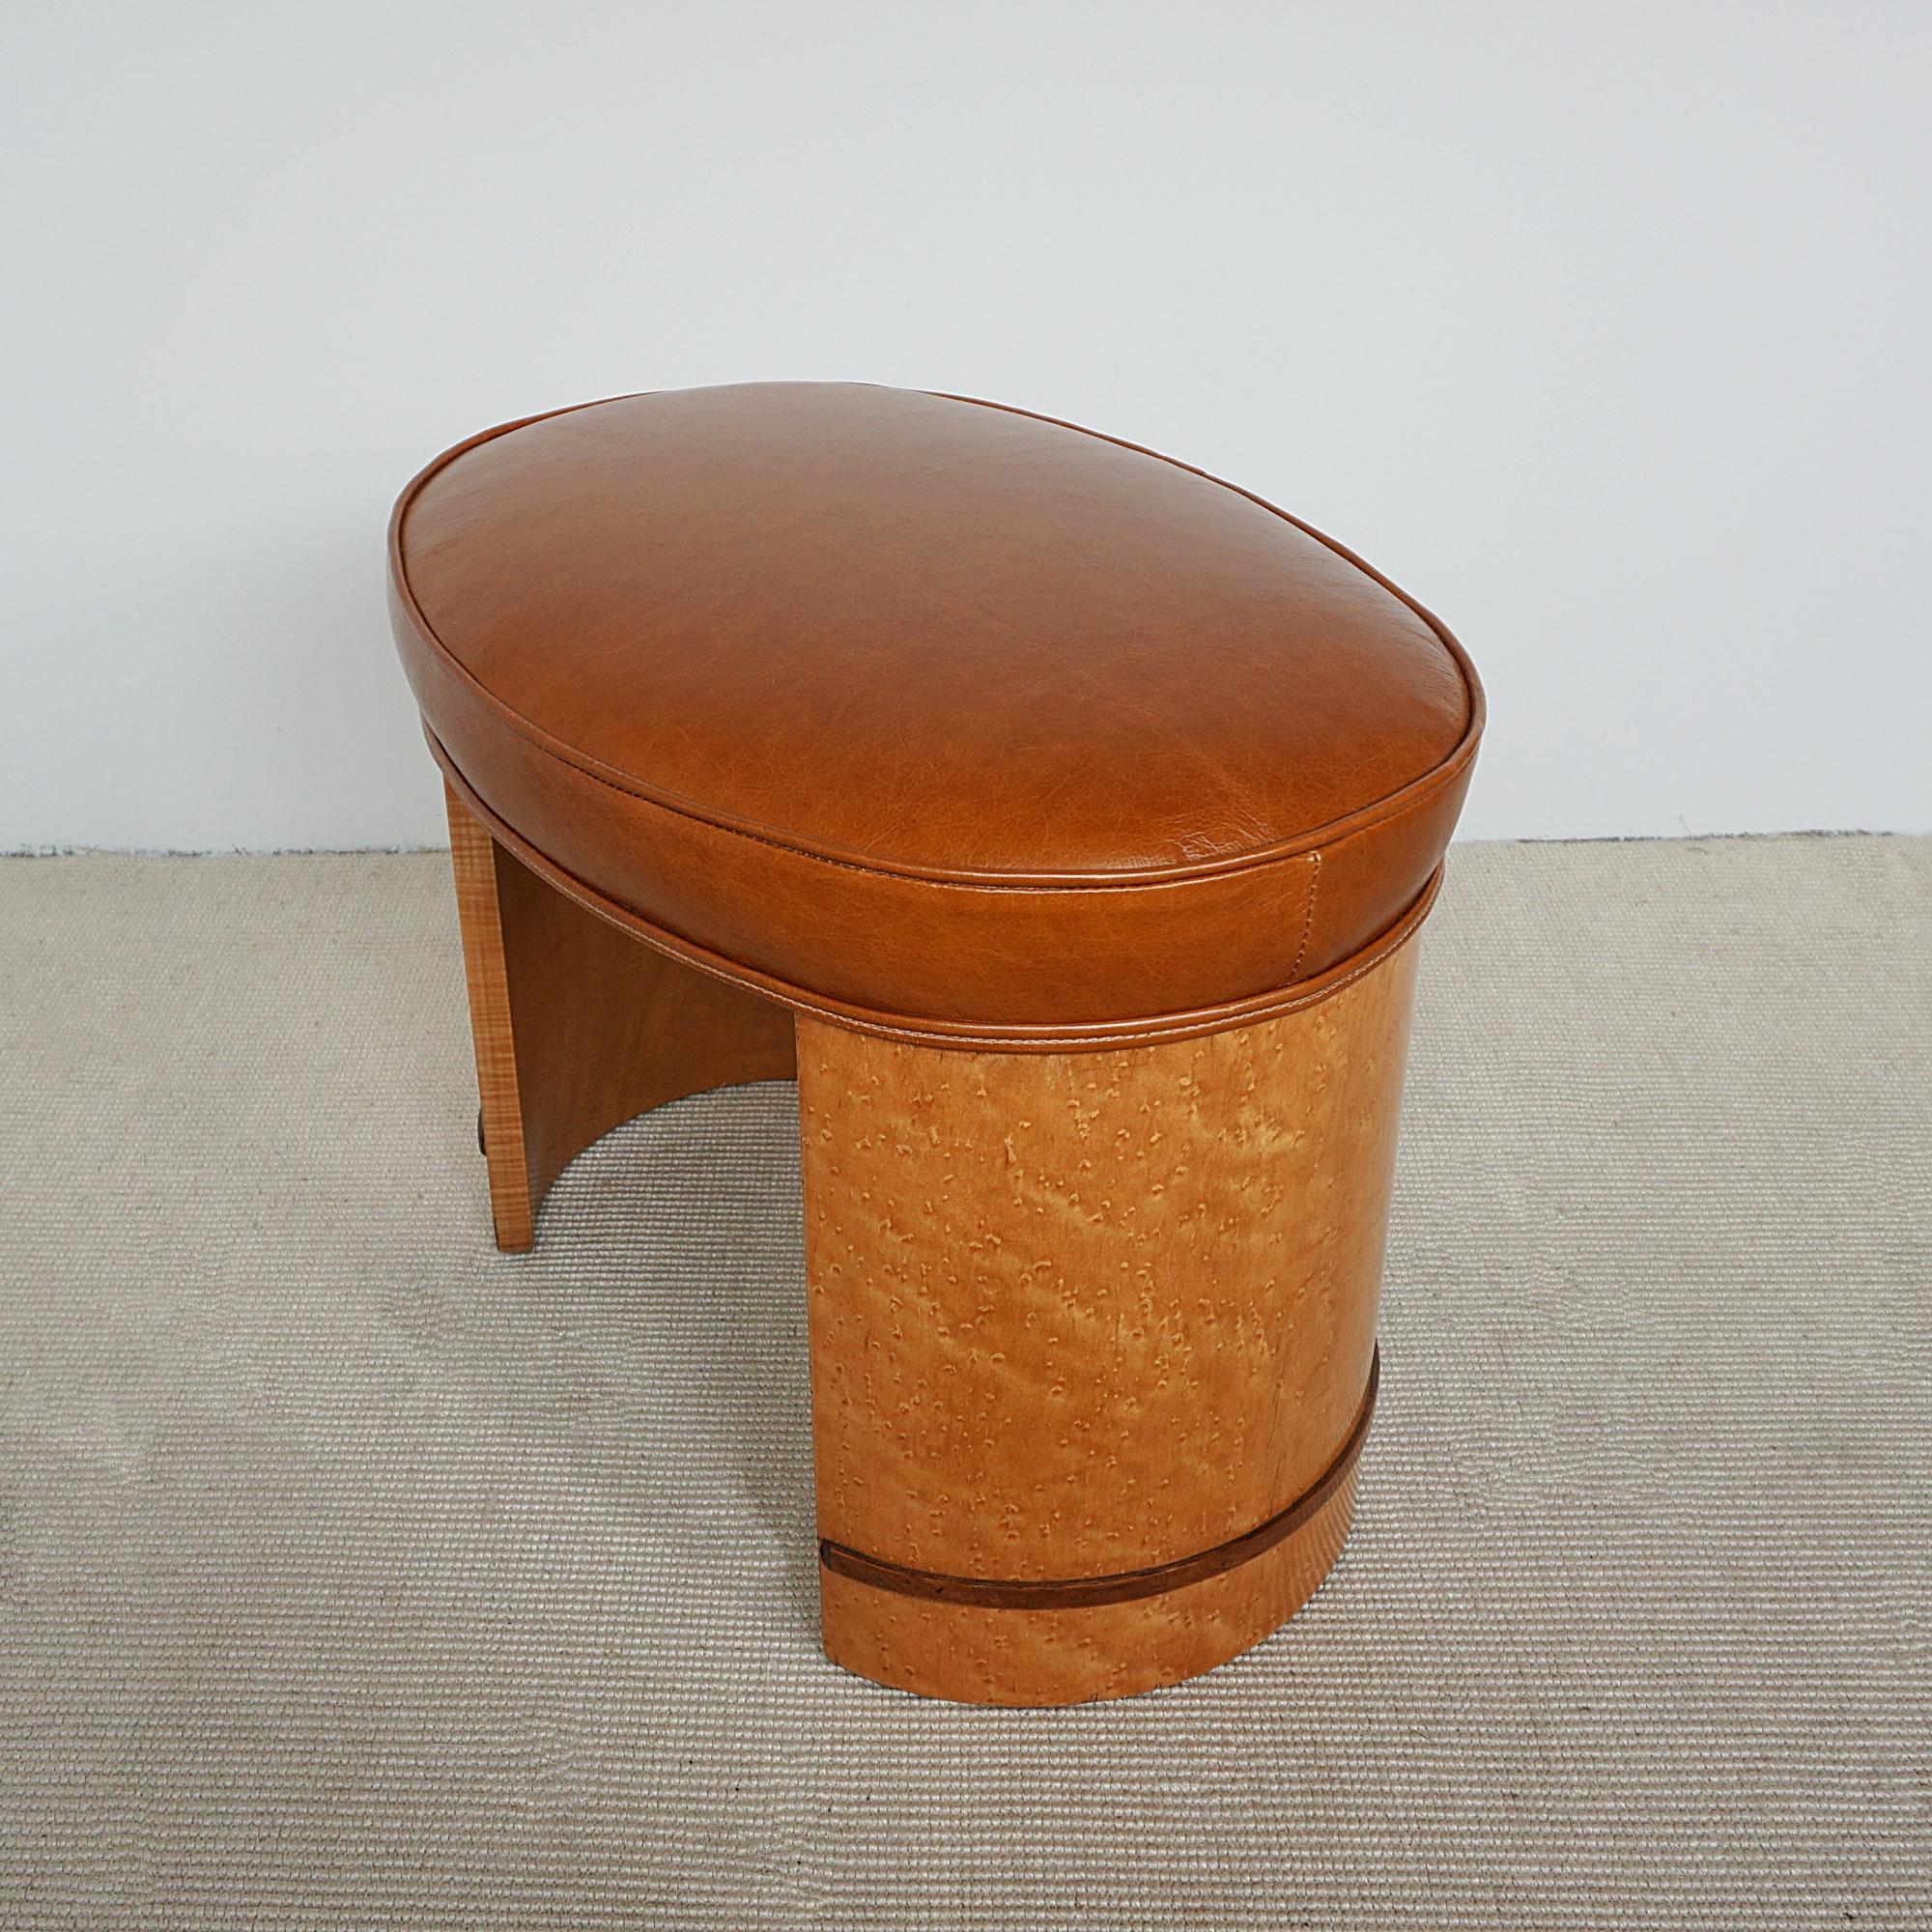 Early 20th Century Art Deco Birdseye Maple Veneered Stool With Brown Leather Re-upholstery